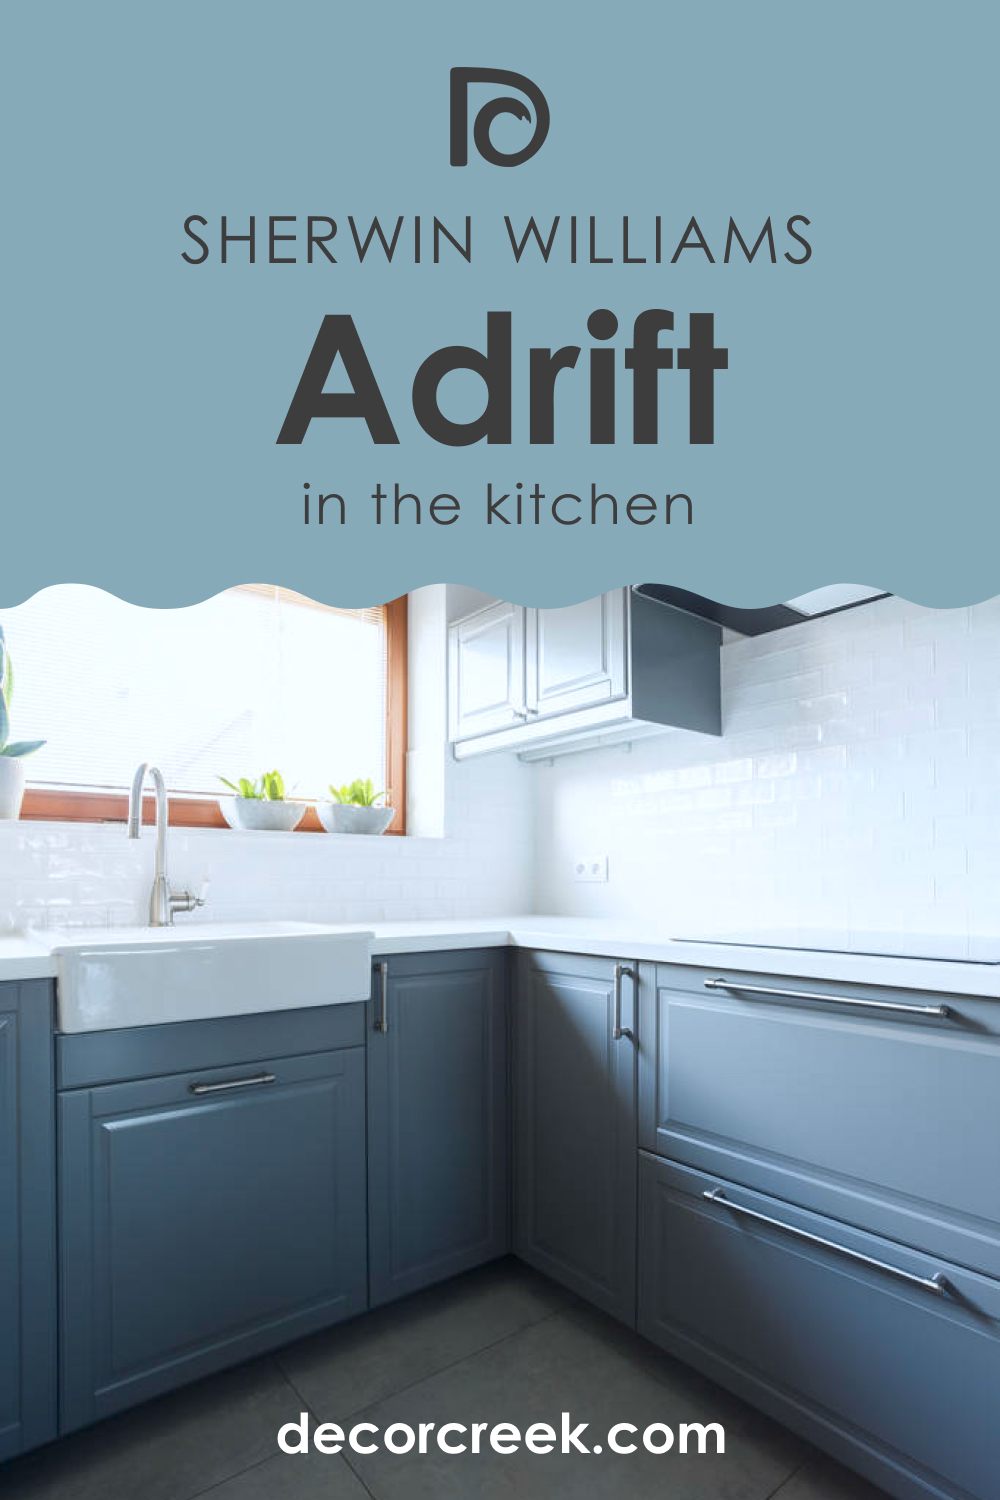 How to Use SW 7608 Adrift for the Kitchen?